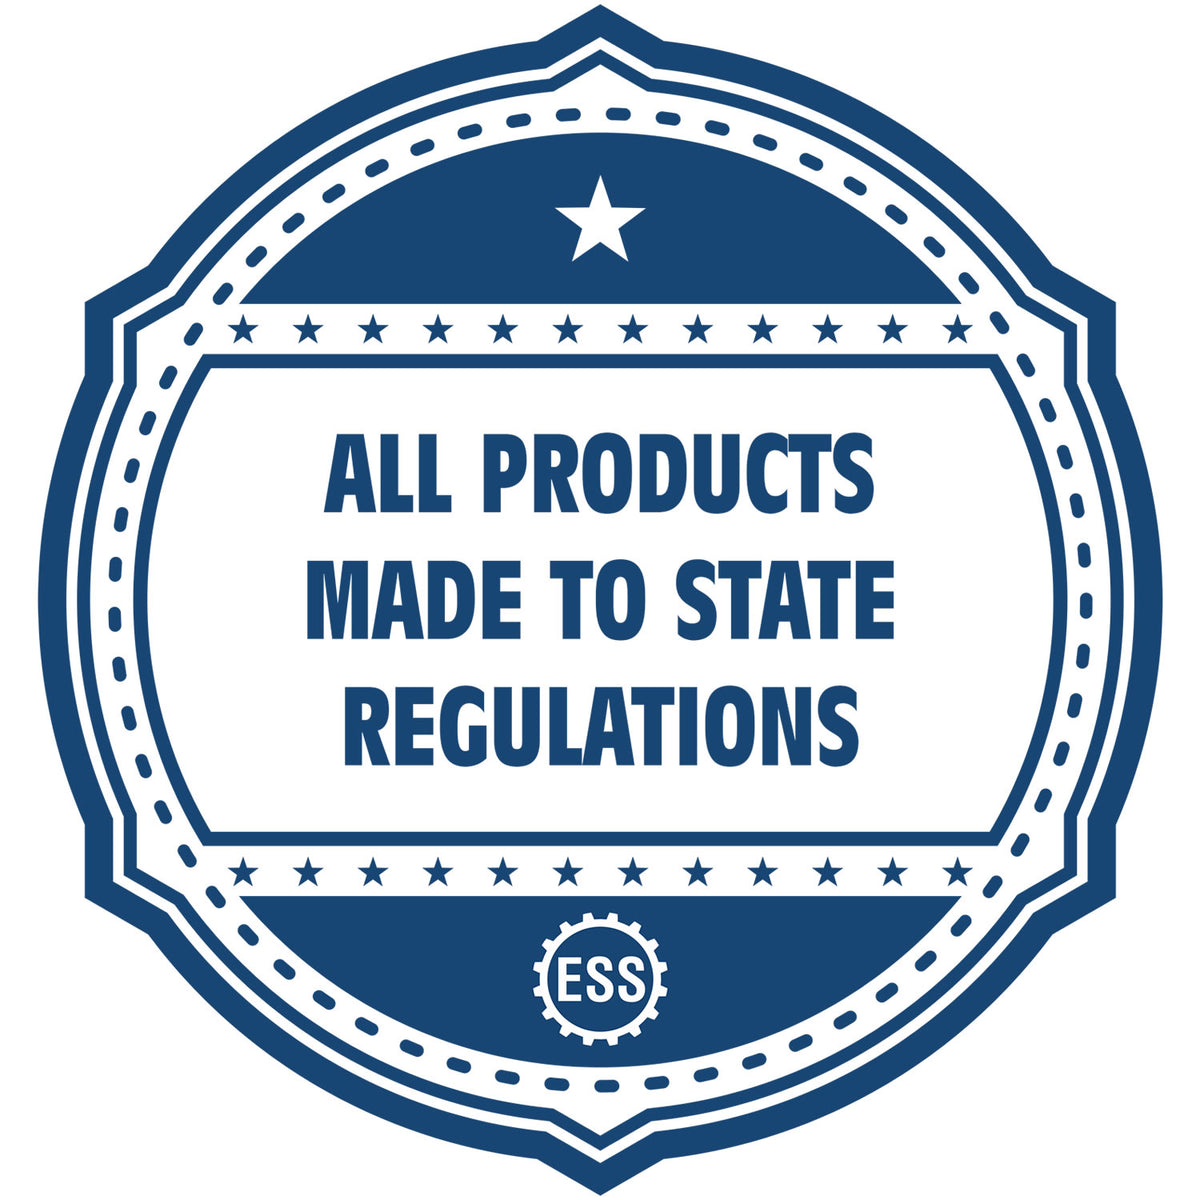 An icon or badge element for the MaxLight Premium Pre-Inked Colorado Rectangular Notarial Stamp showing that this product is made in compliance with state regulations.